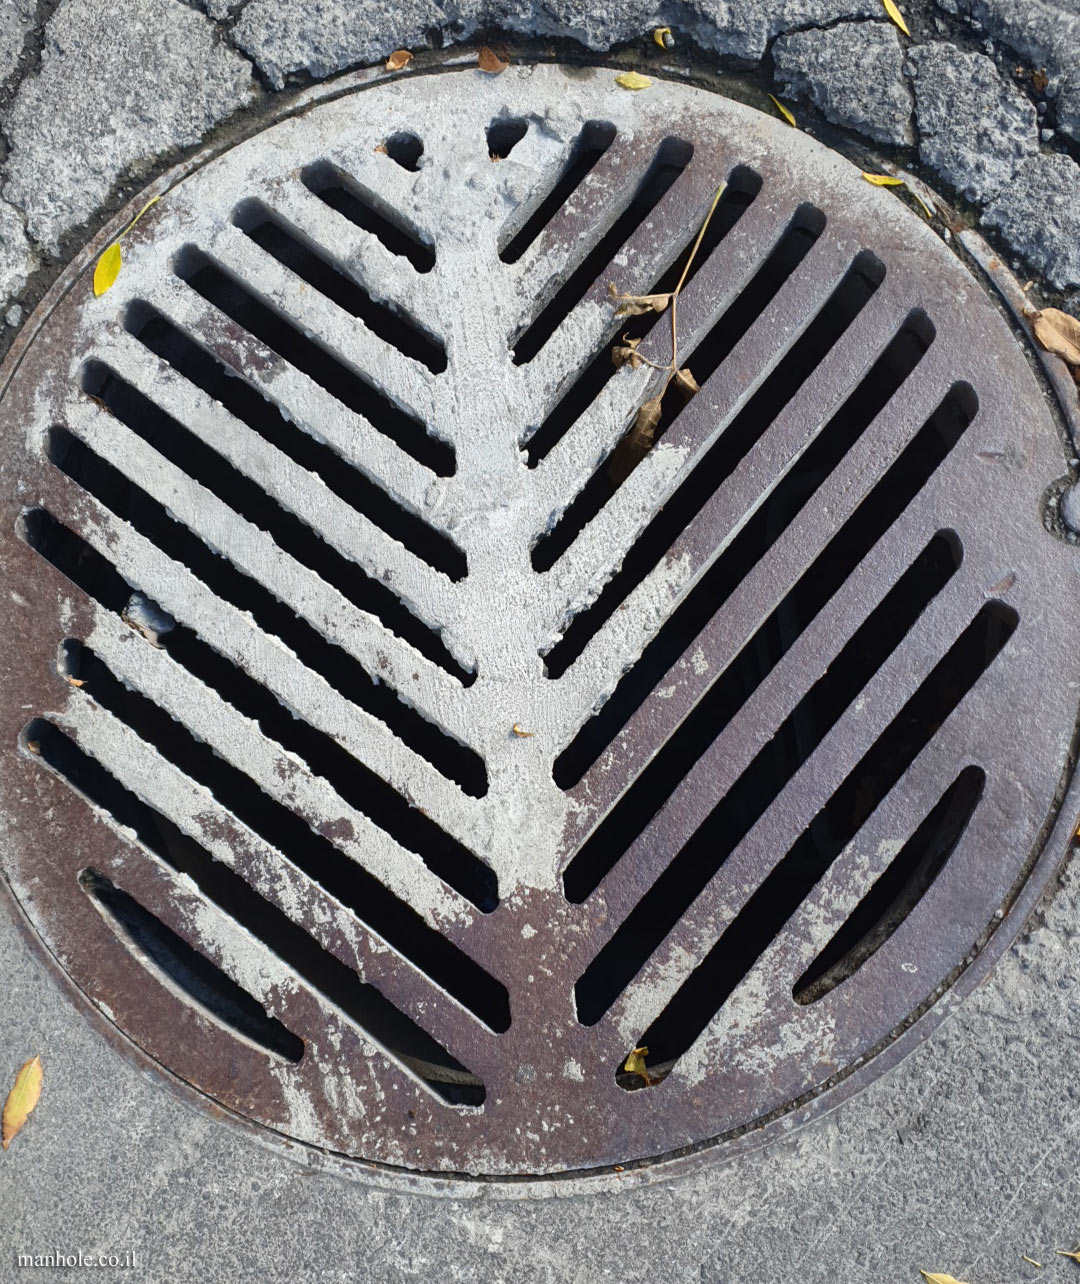 Montreal - Drain cover with grooves similar to tree branches